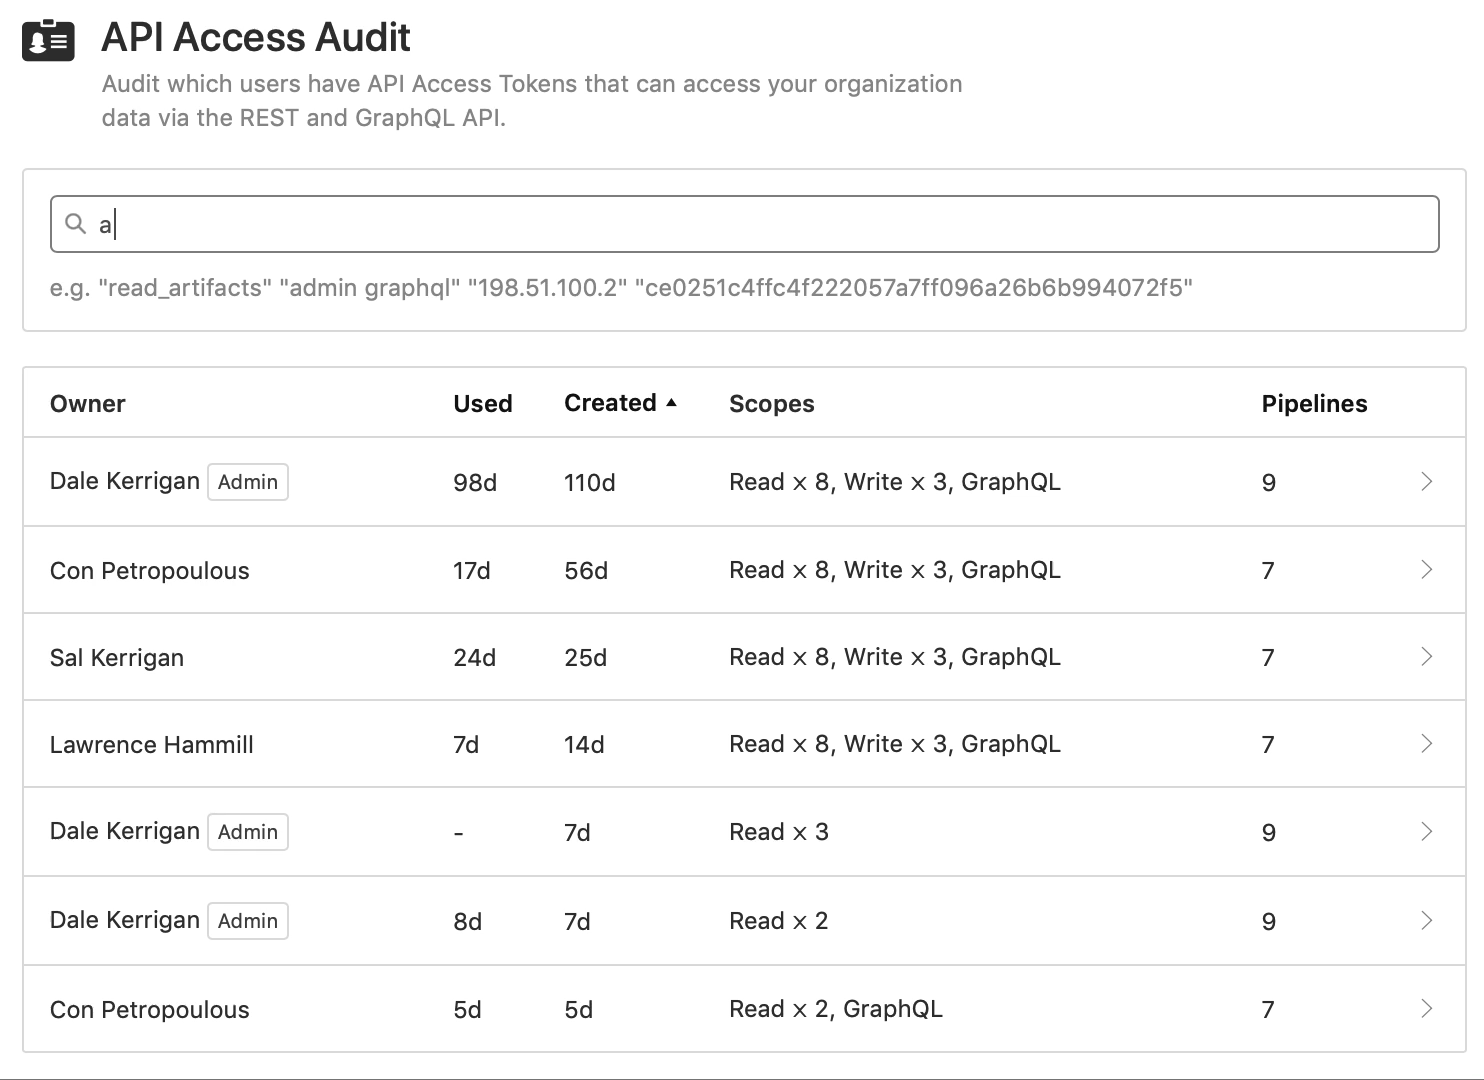 Searching for tokens using the new API Access Audit page